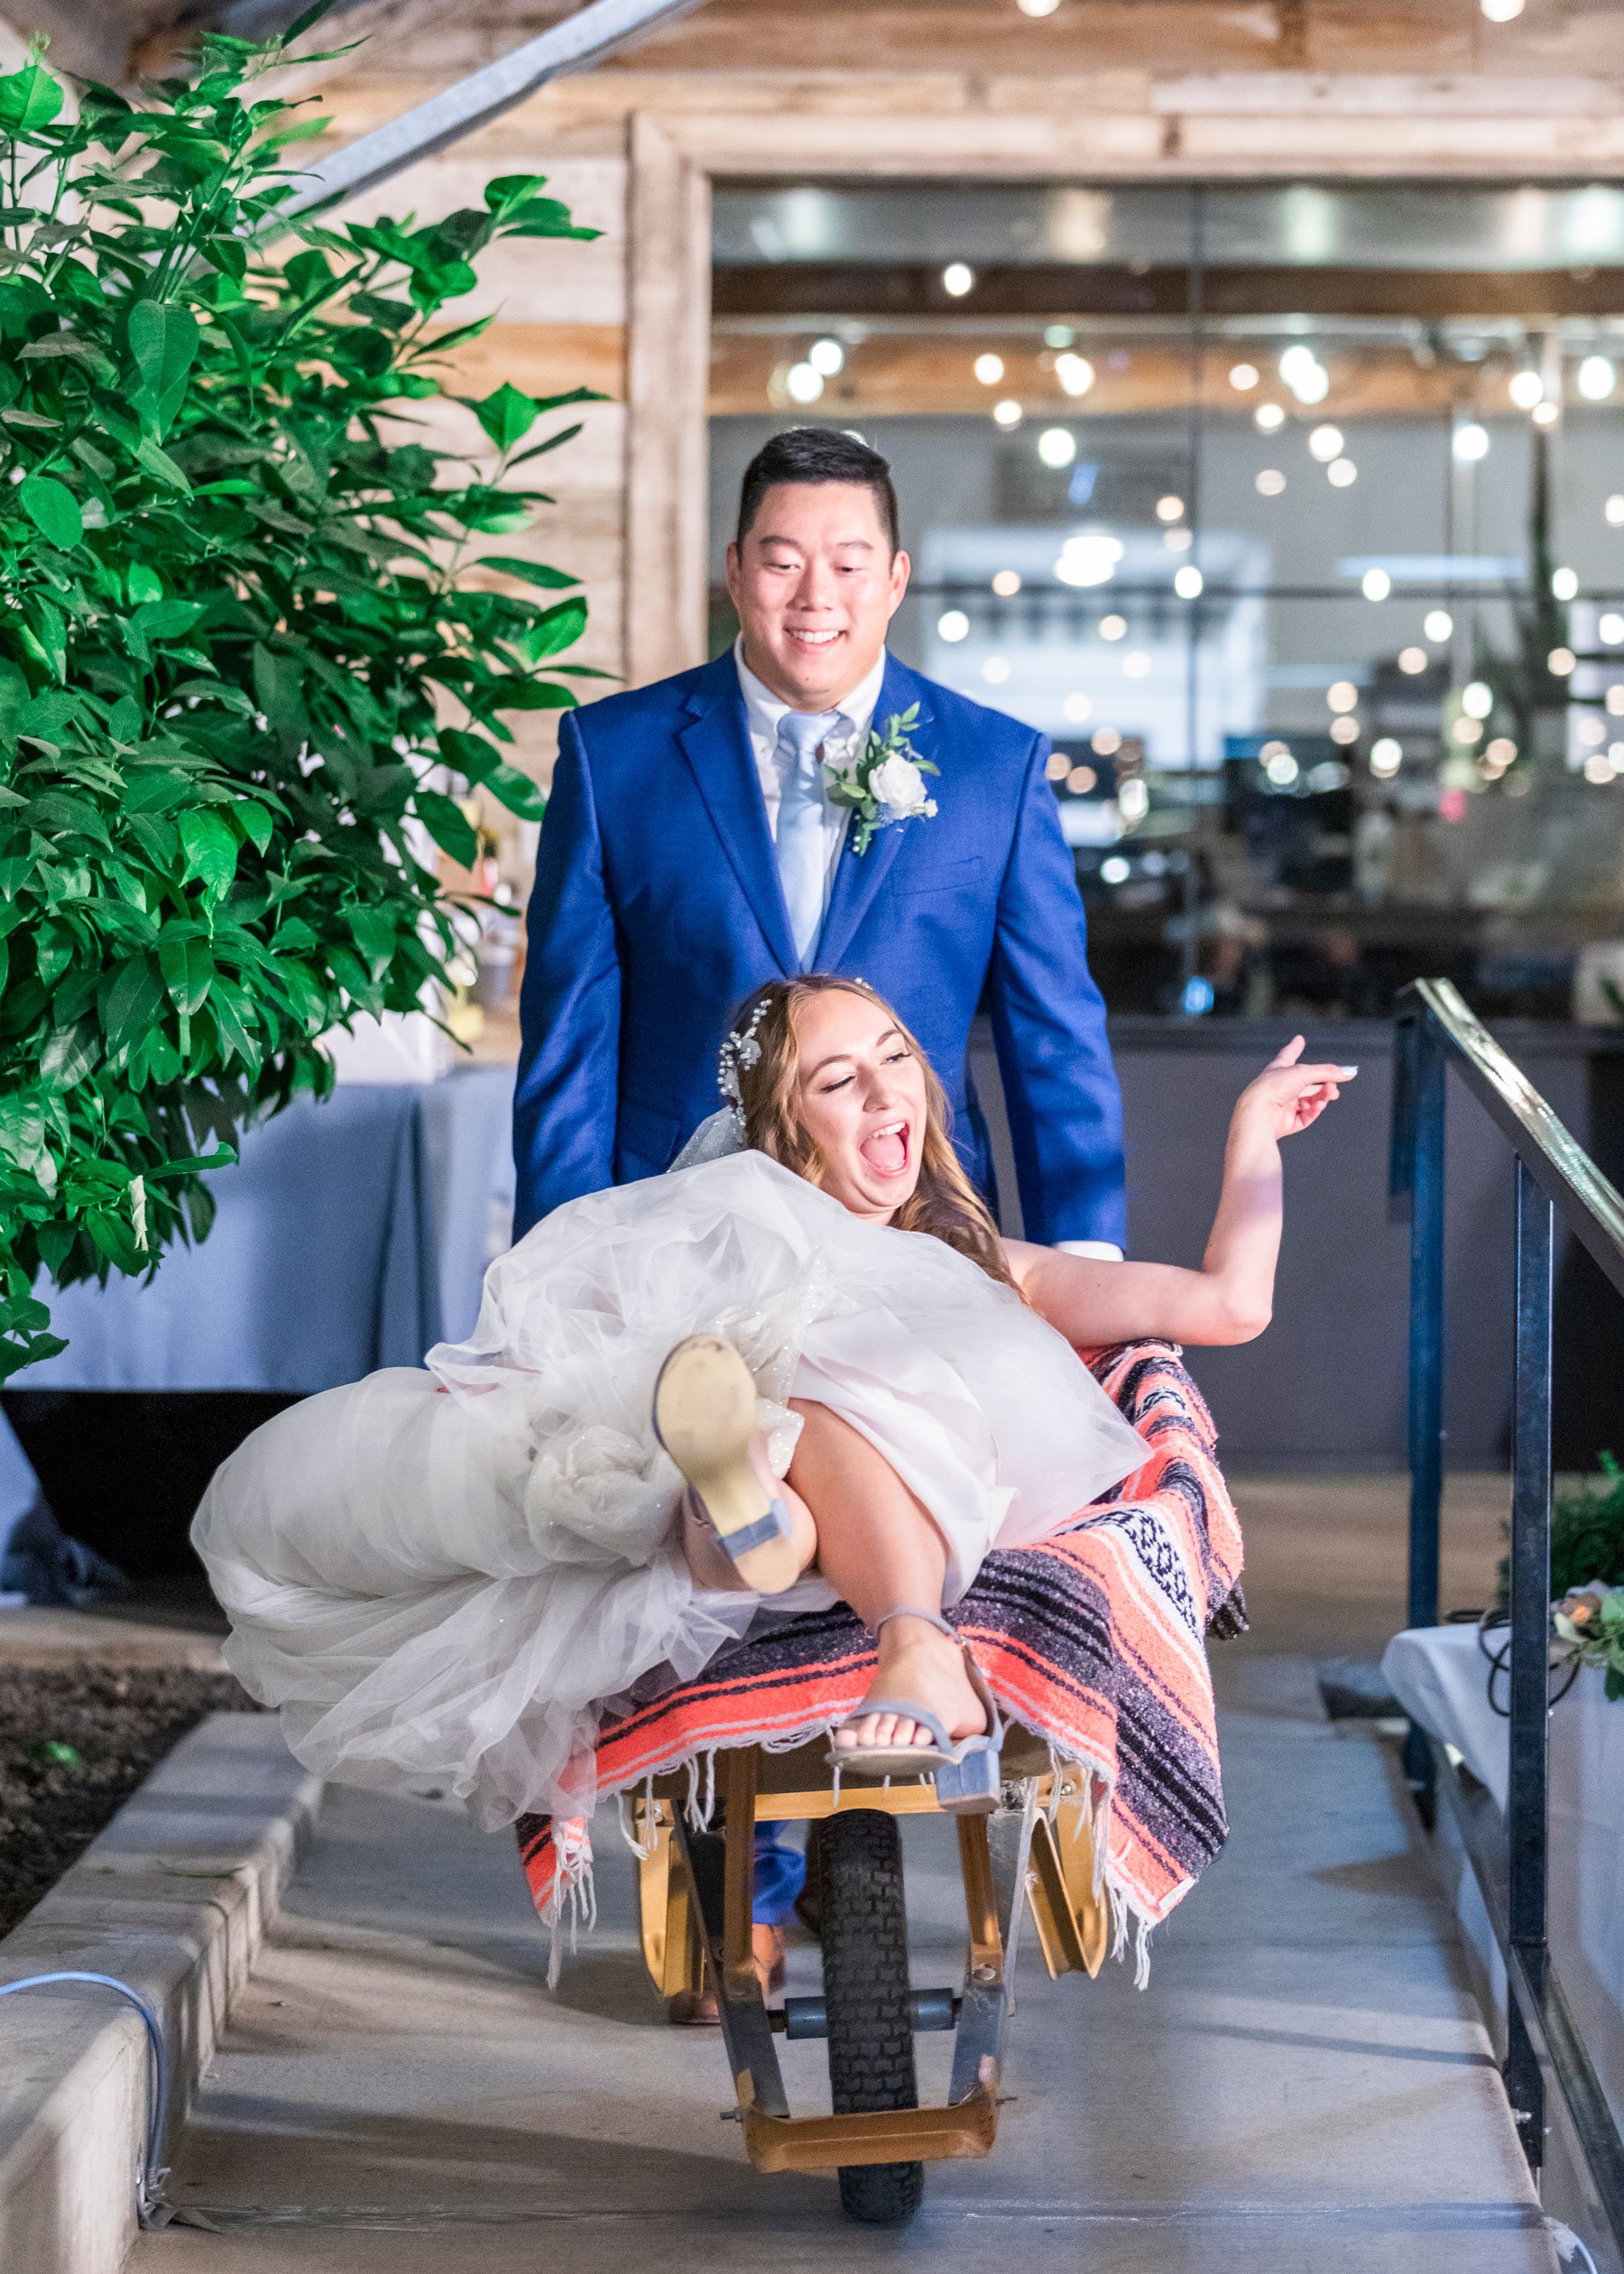  Darling fun picture of the groom pushing the bride in a wheelbarrow as she sits on a Mexican blanket and parties by Savanna Richardson Photography. fun wedding pictures wheelbarrow wedding pictures spunky wedding portraits #savannarichardsonphotogra